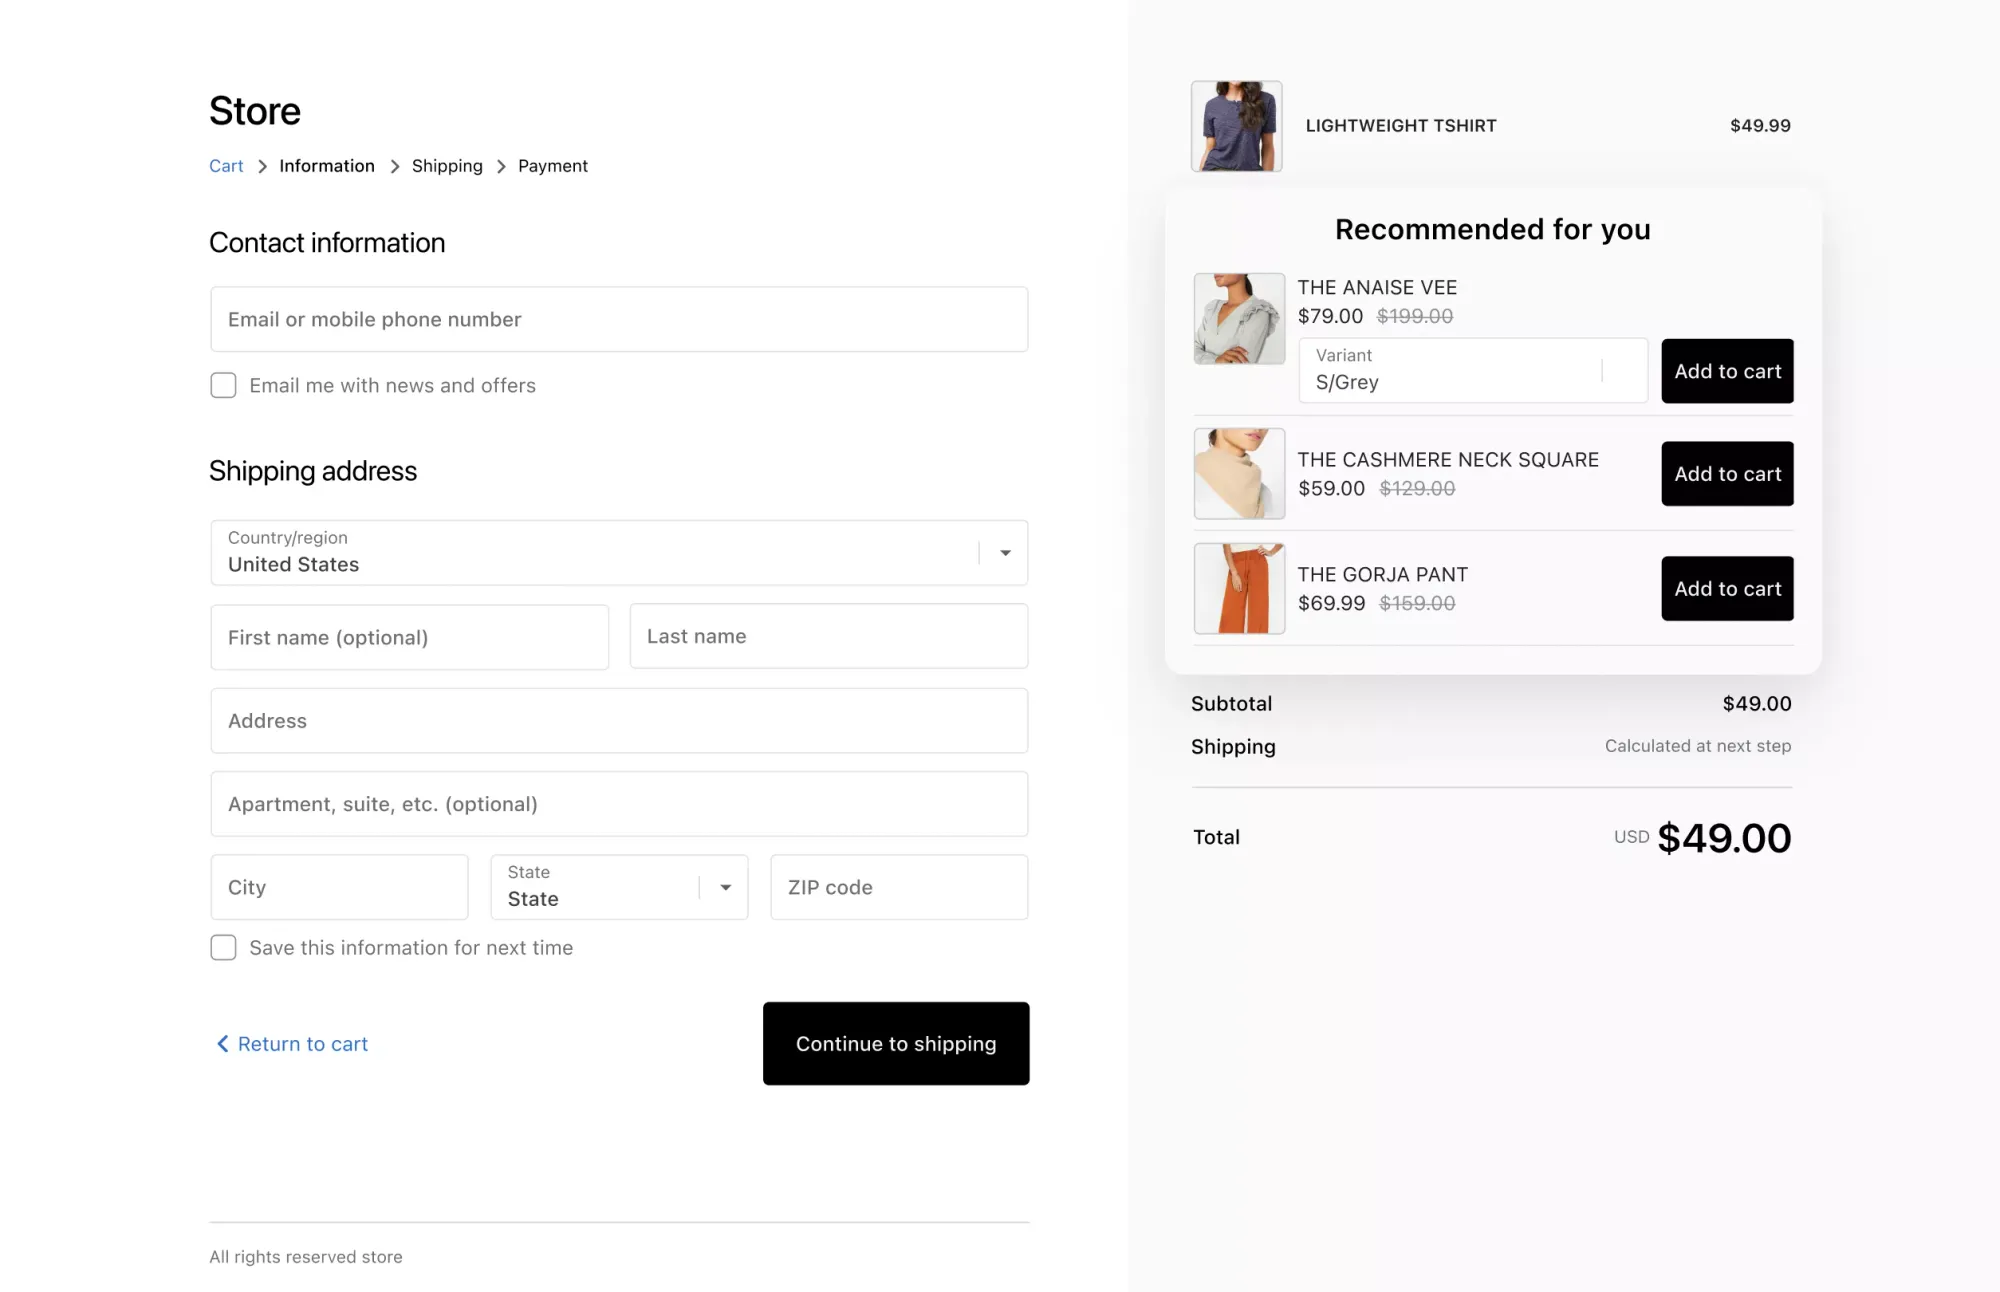 Screenshot of AfterShip Personalization in a checkout.